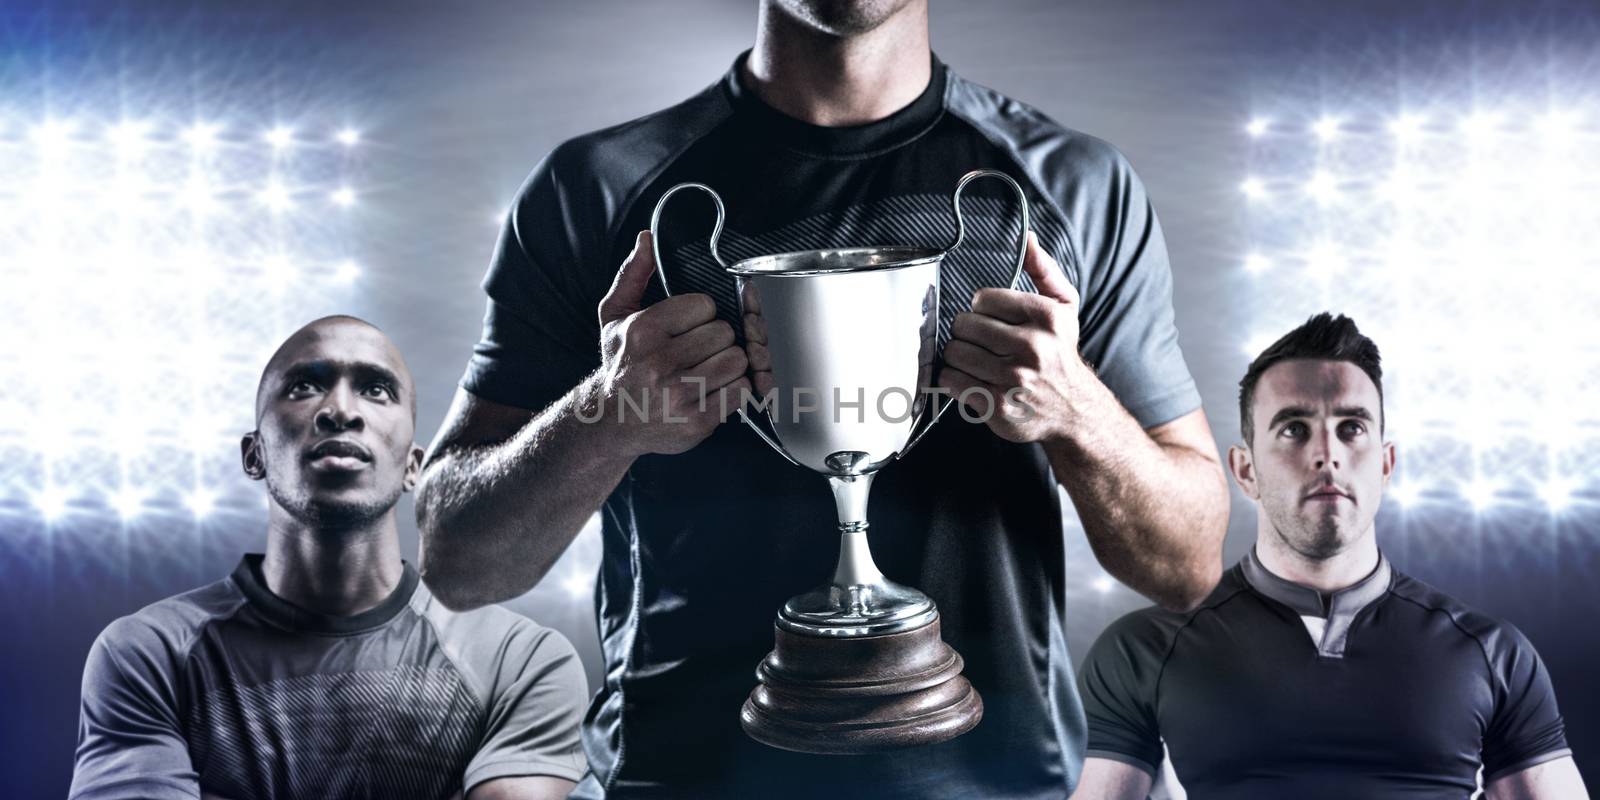 Victorious rugby player holding trophy against spotlight